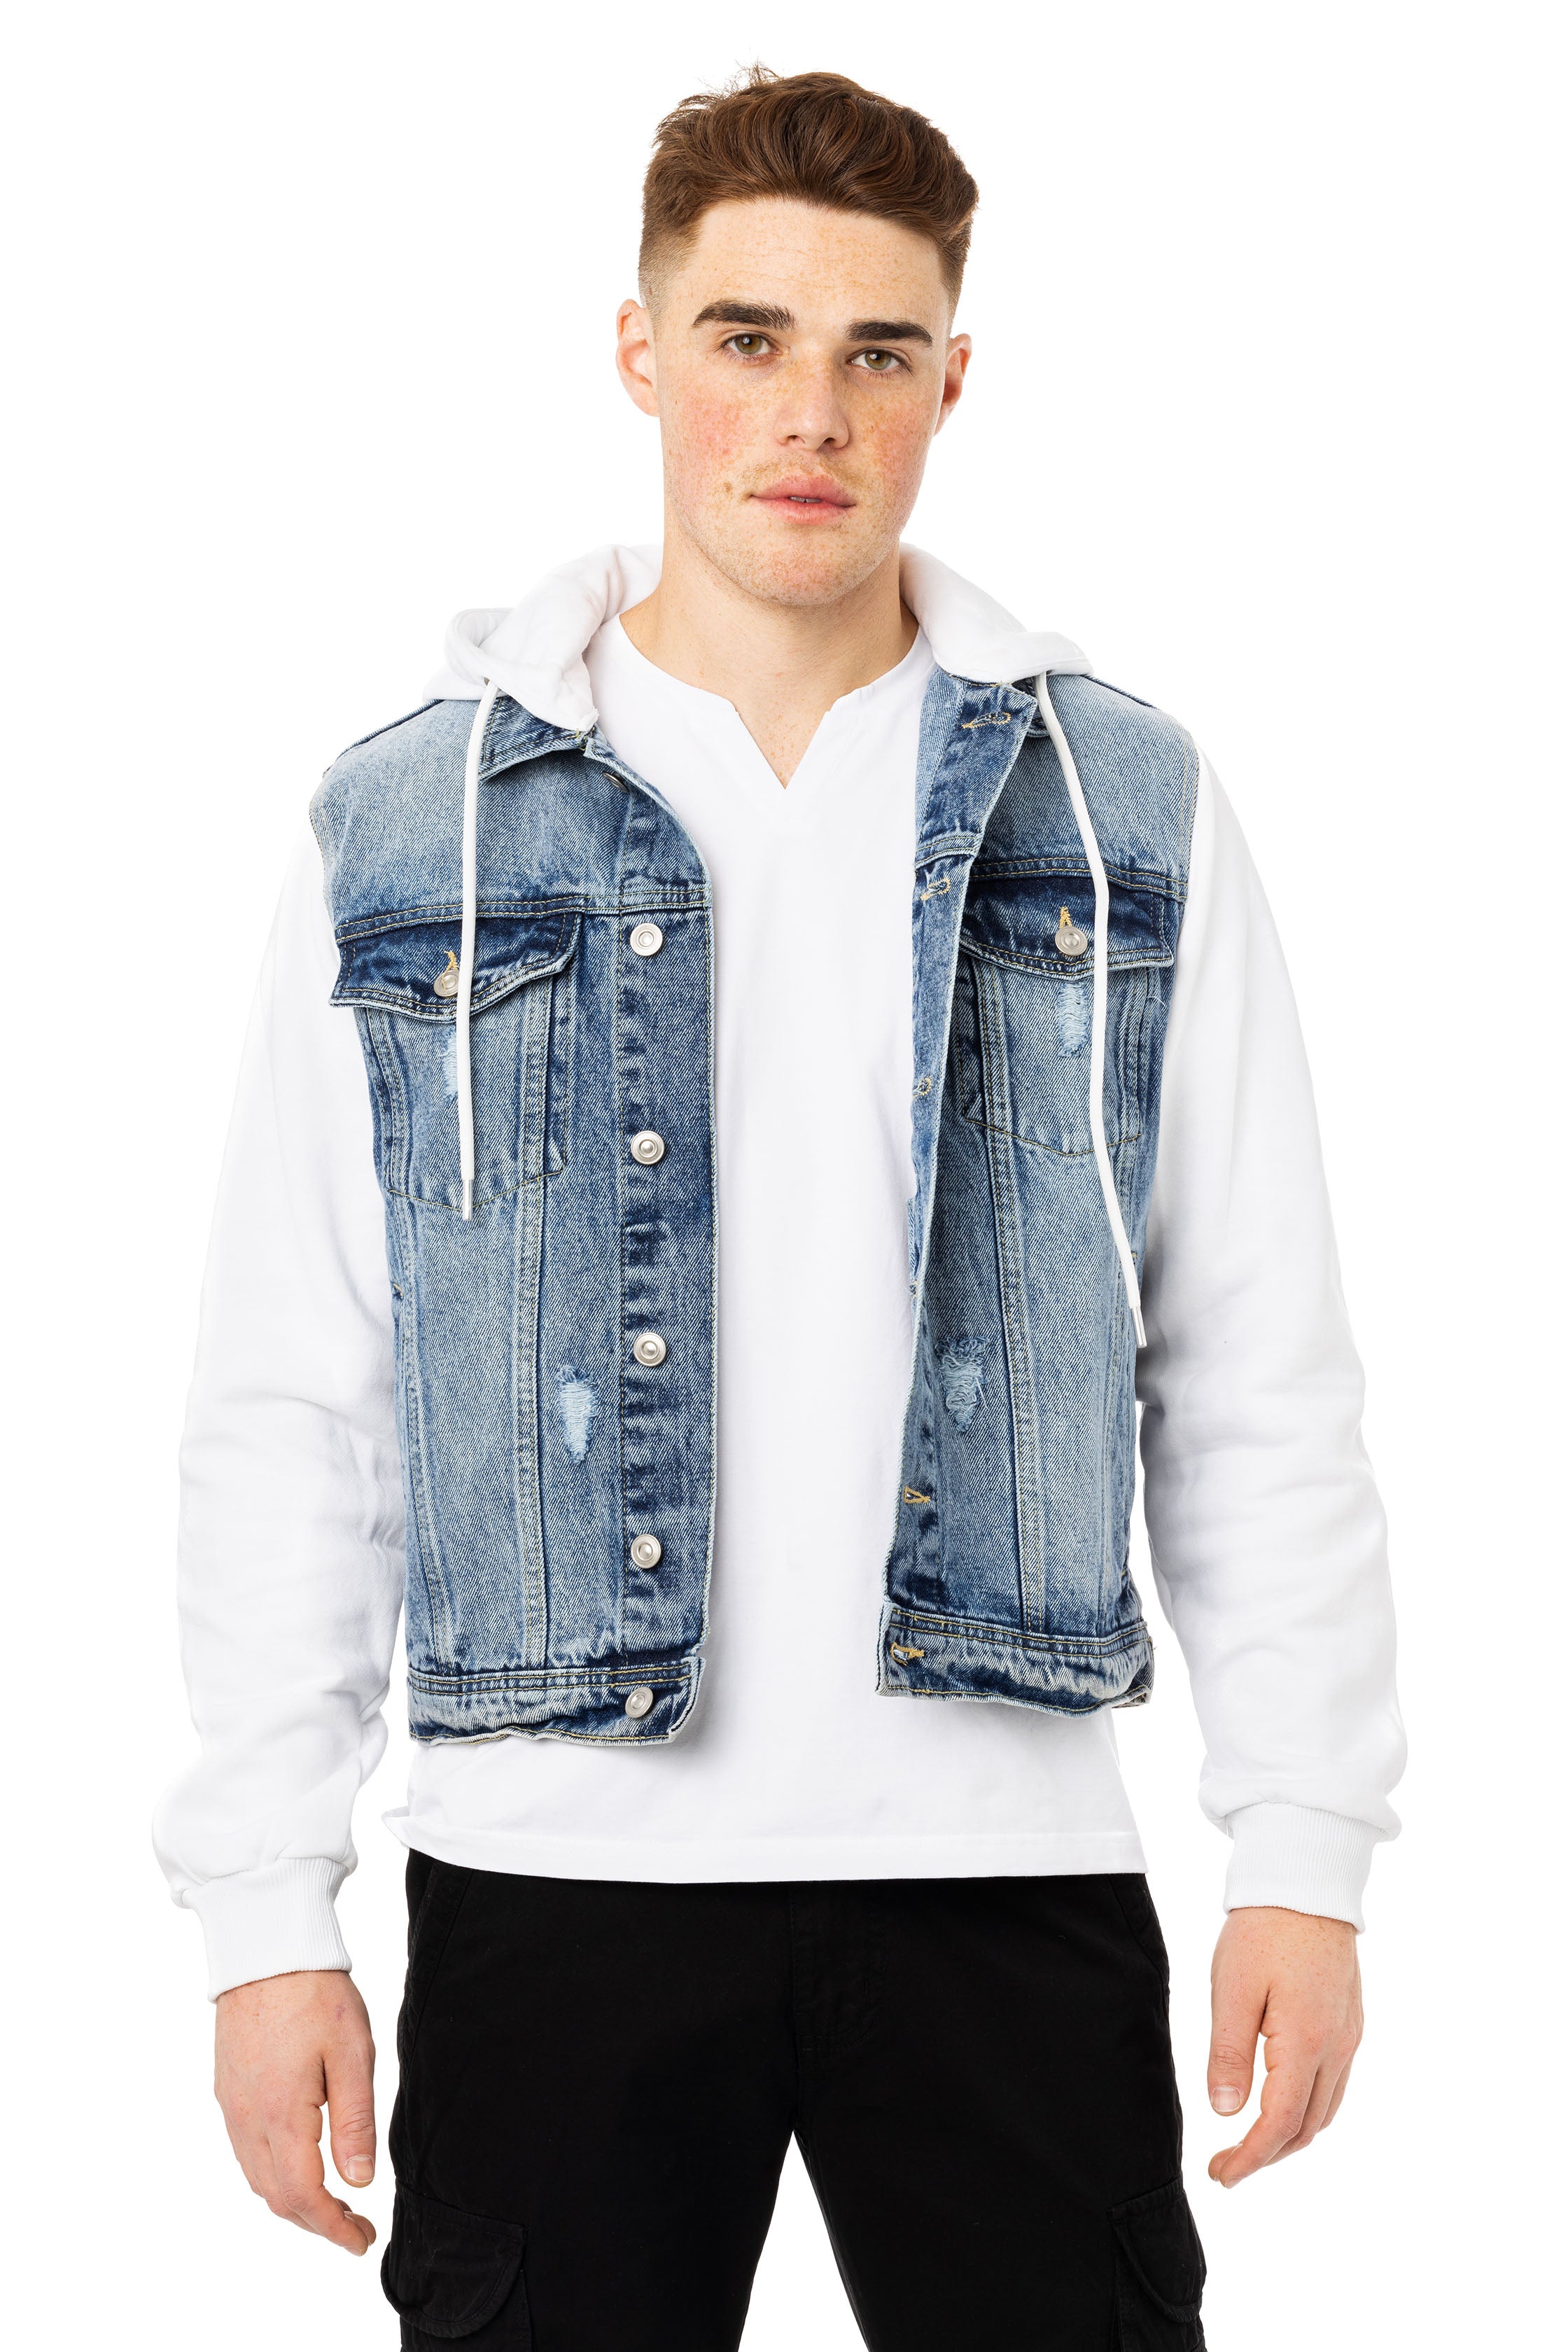 Lids Pittsburgh Steelers The Wild Collective Hooded Full-Button Denim Jacket  - Black | CoolSprings Galleria